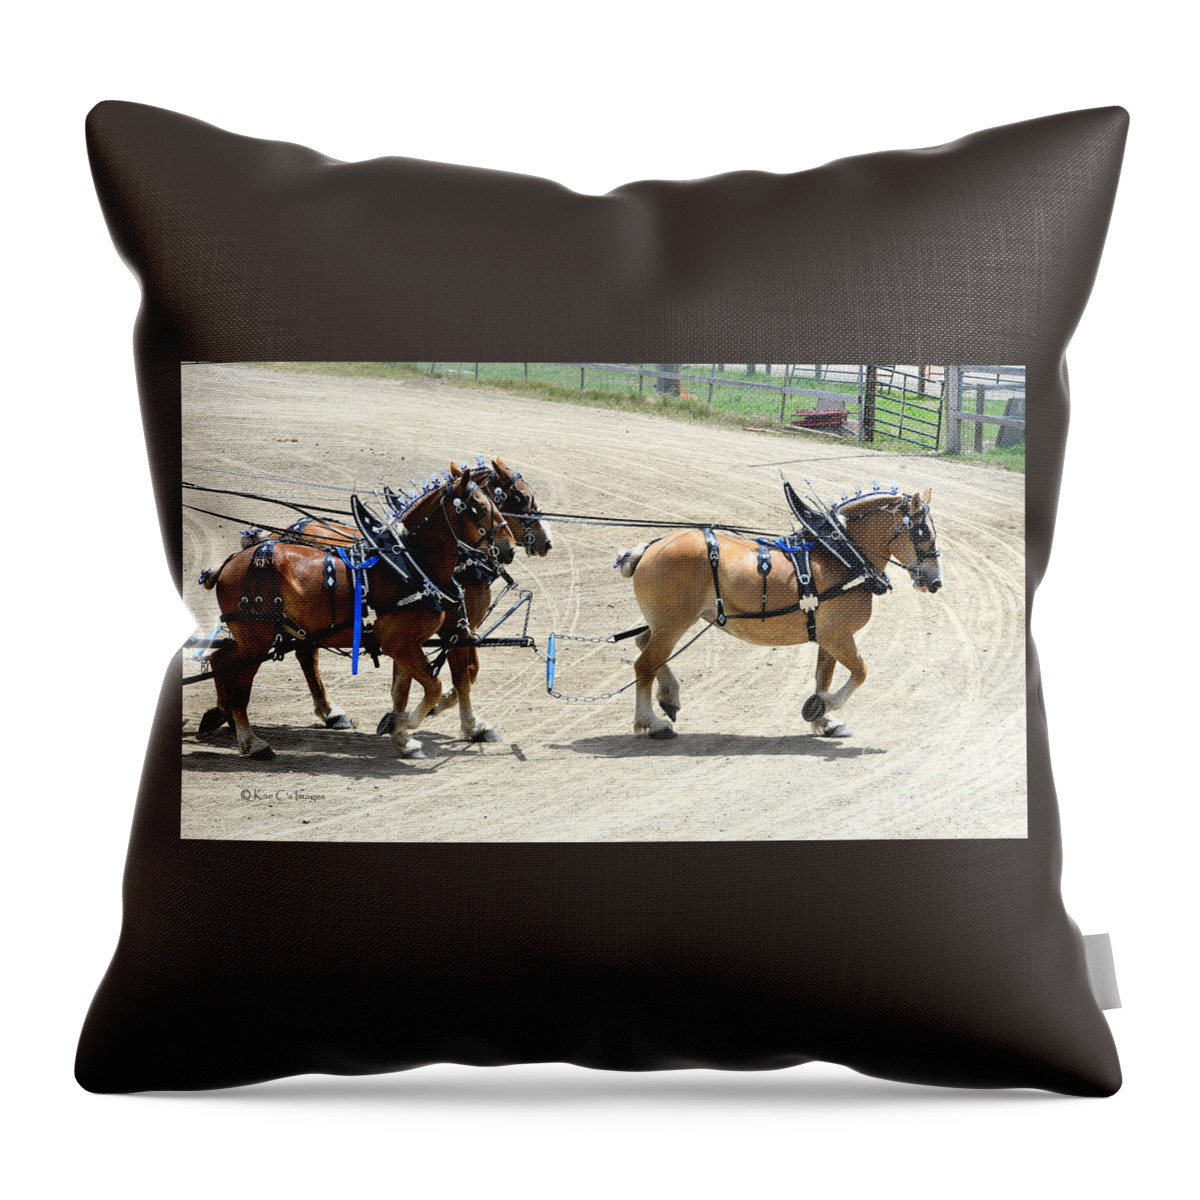 Horses Throw Pillow featuring the photograph Unicorn Class at the Draft Horse Expo by Kae Cheatham